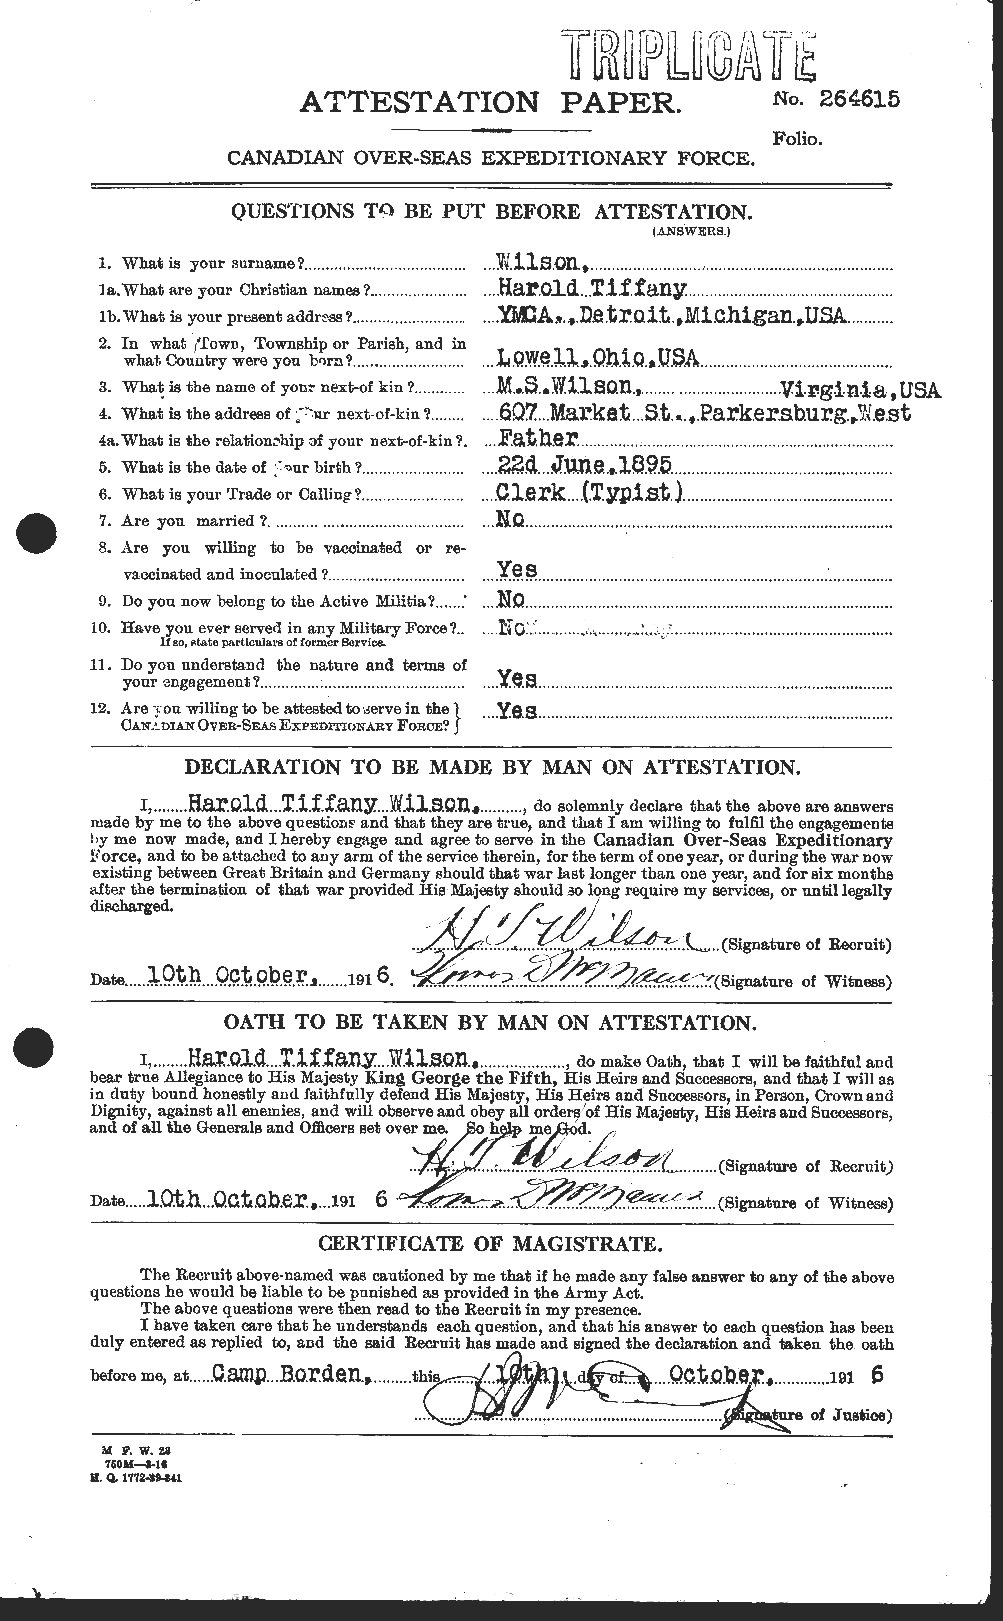 Personnel Records of the First World War - CEF 679416a